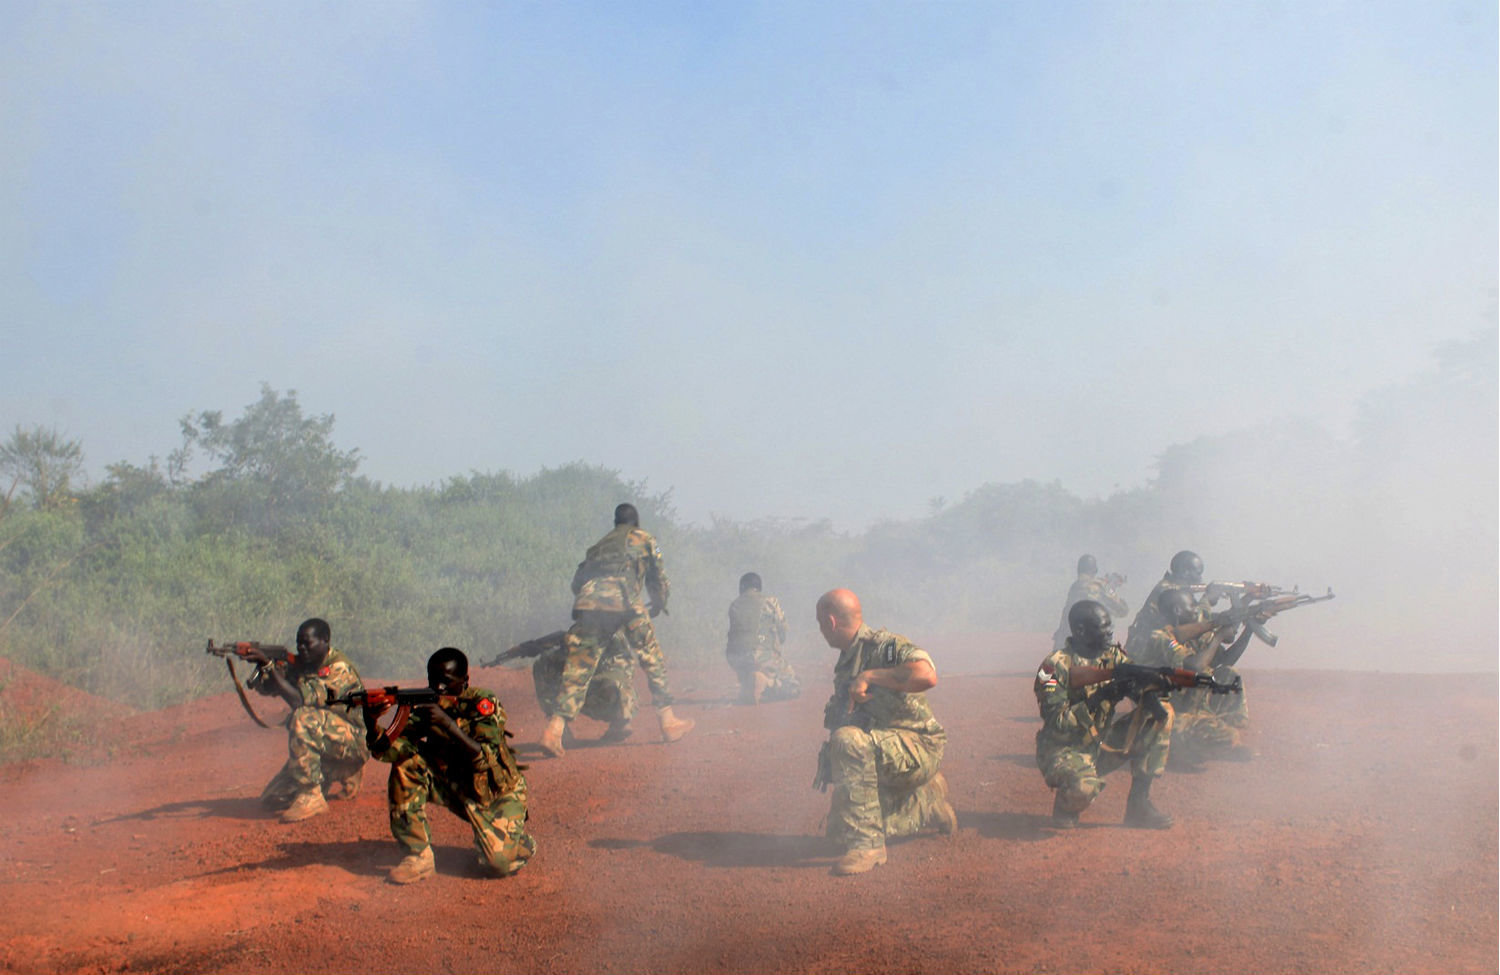 ﻿ A US Special Forces trainer supervises a military assault drill in Sudan in 2013